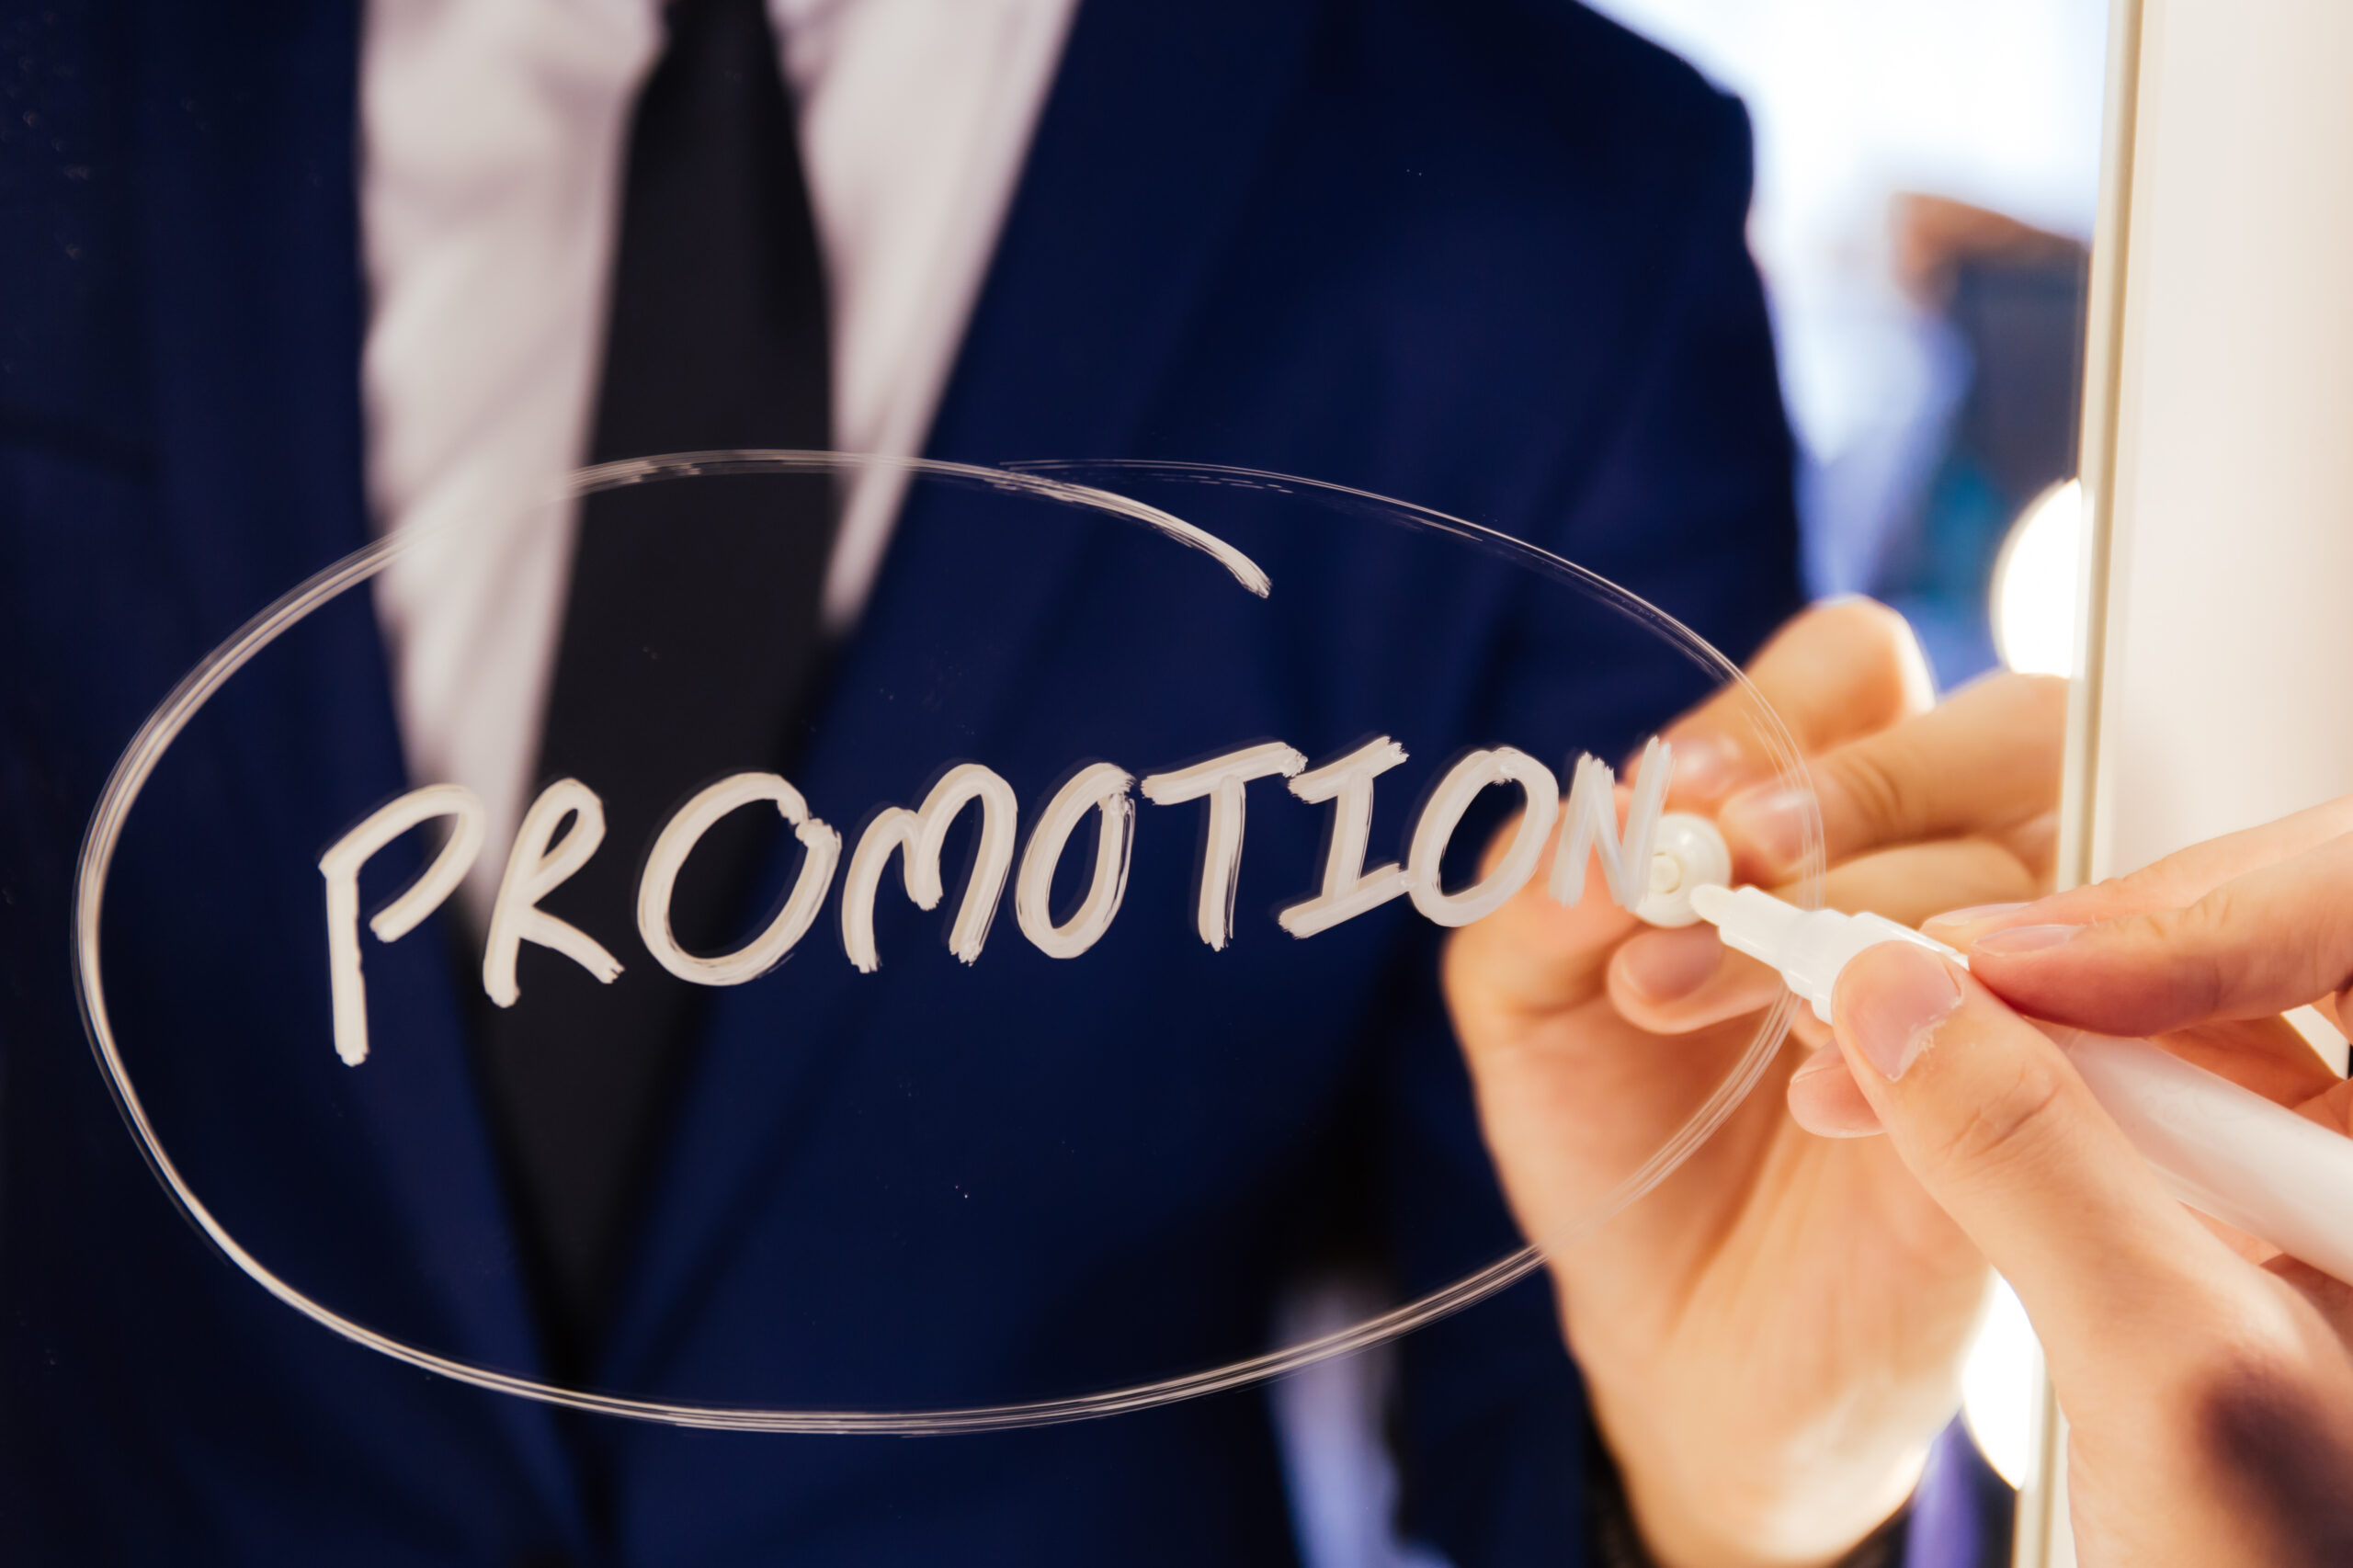 How Promotional Products Can Benefit Your Business